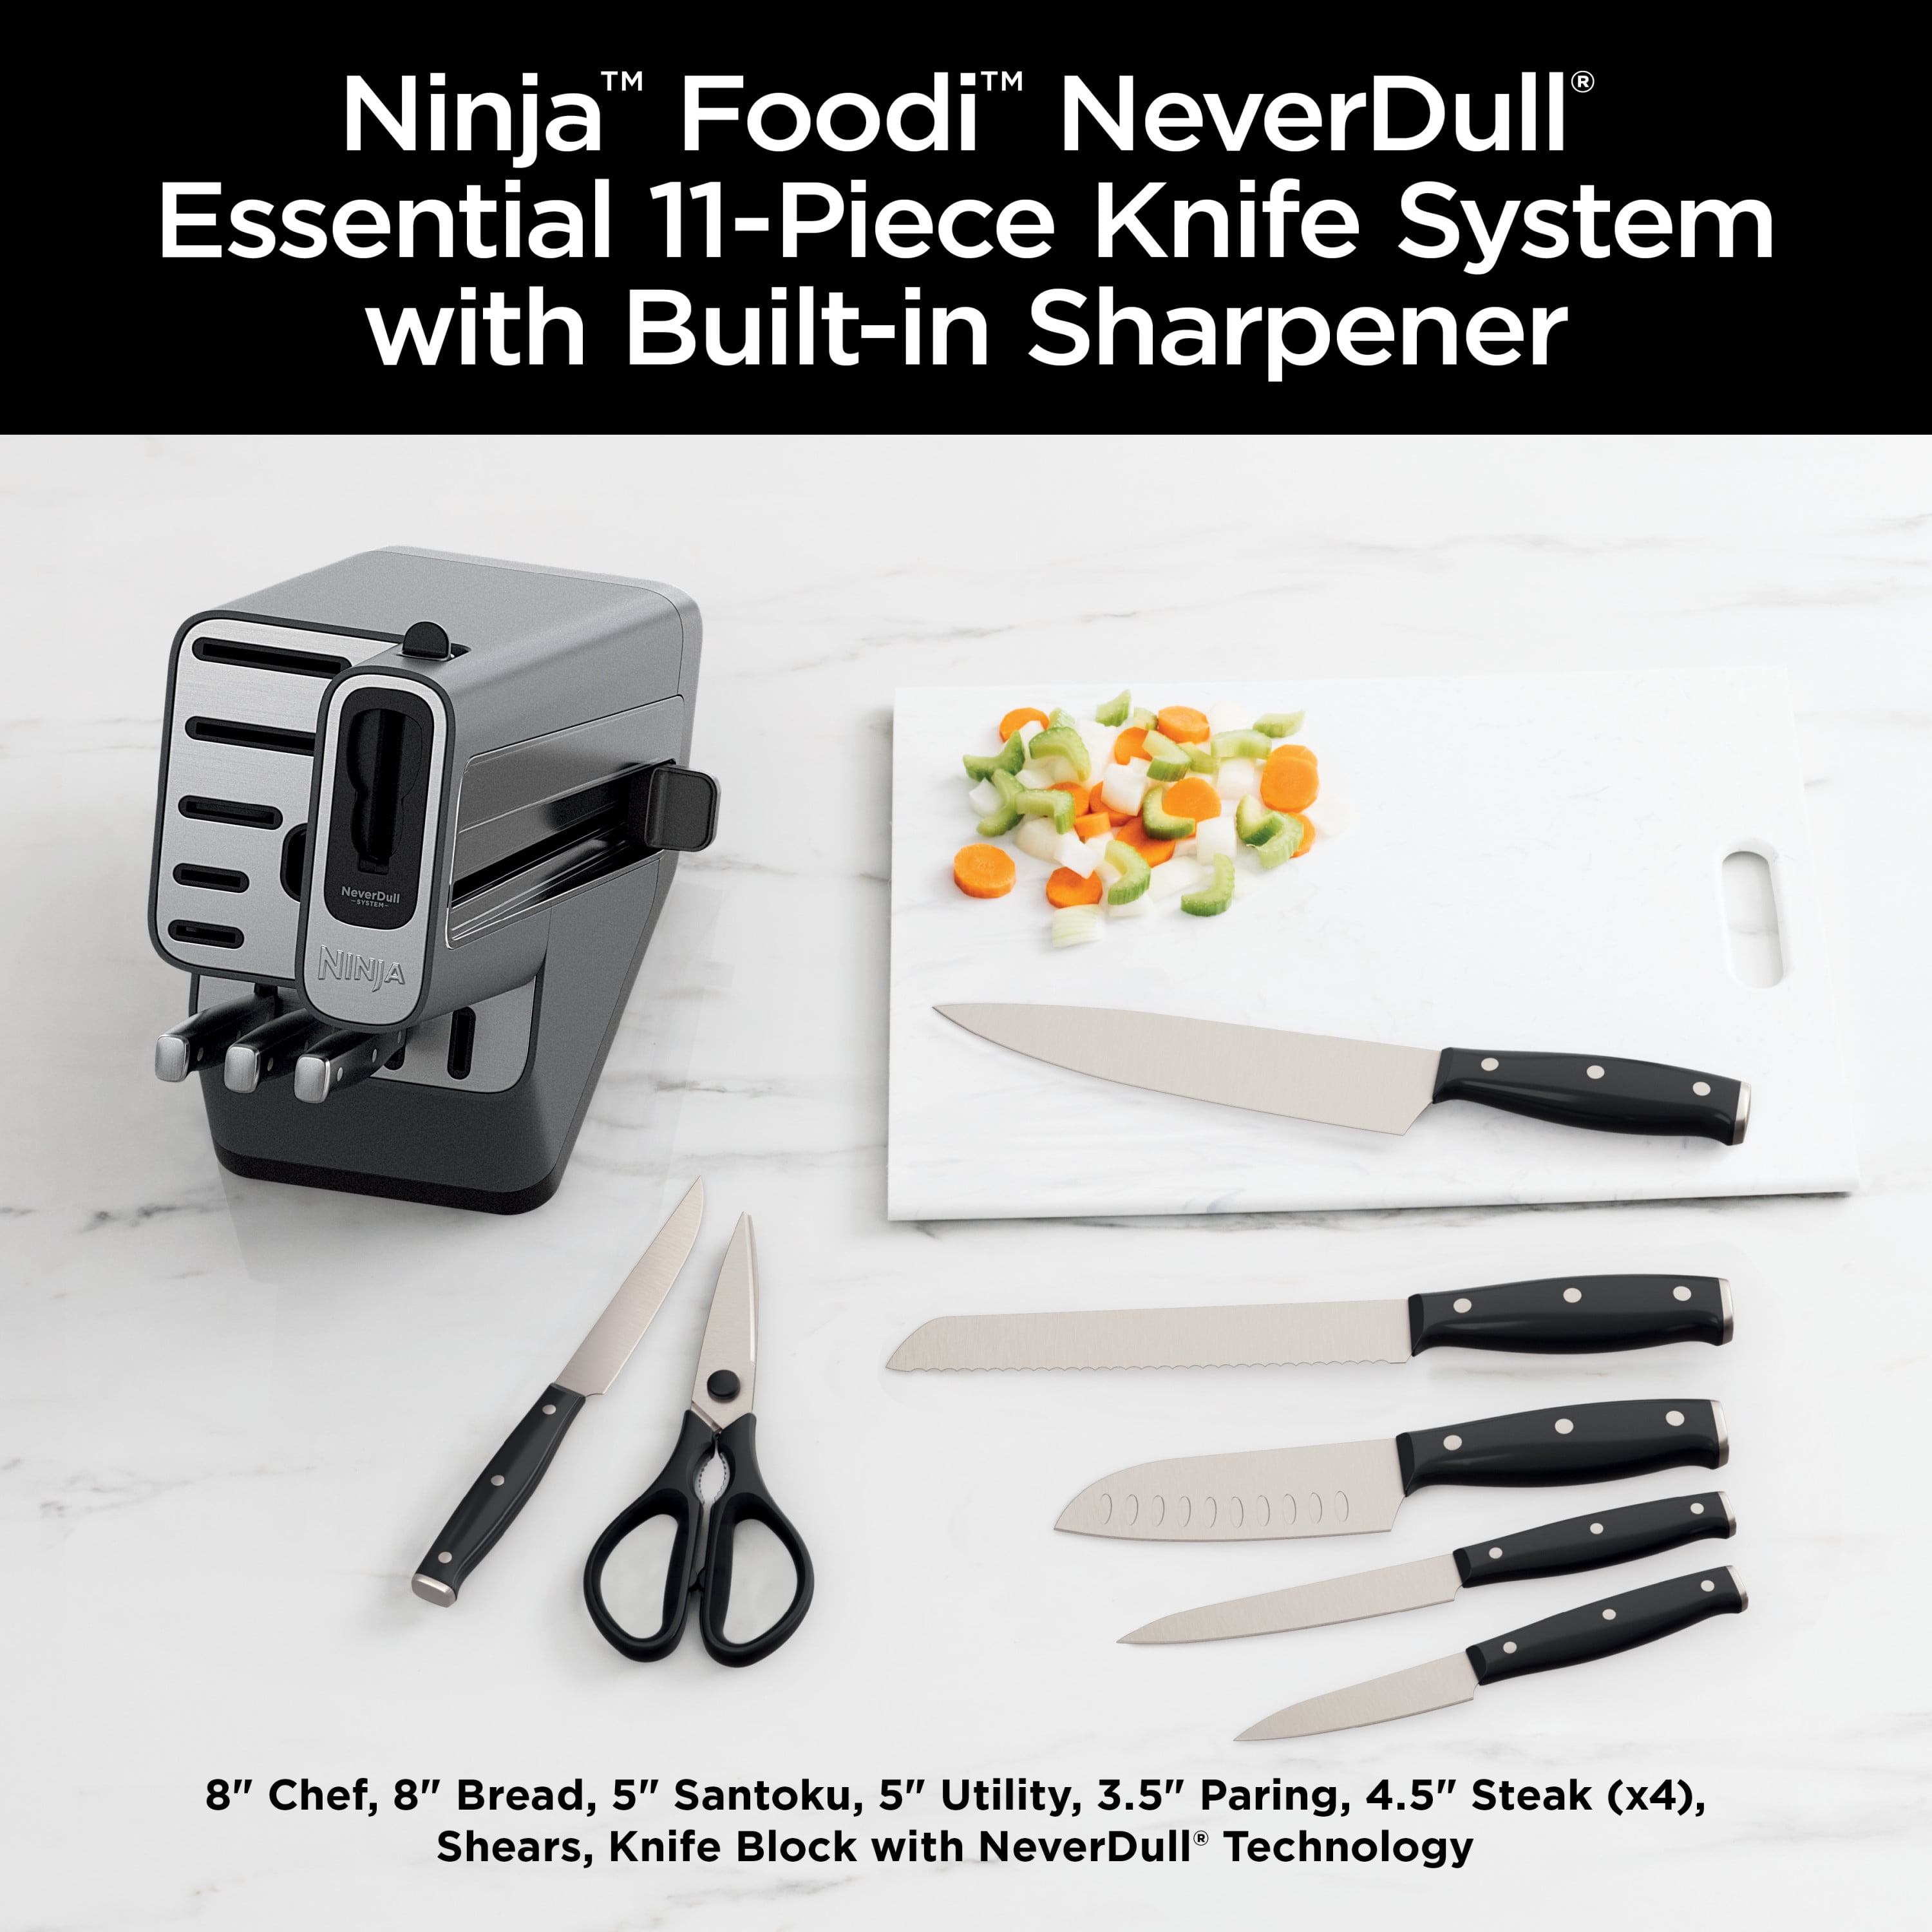 Ninja™ Foodi™ NeverDull™ 11-Piece Essential Knife System with Sharpener,  K12011 Stainless Steel